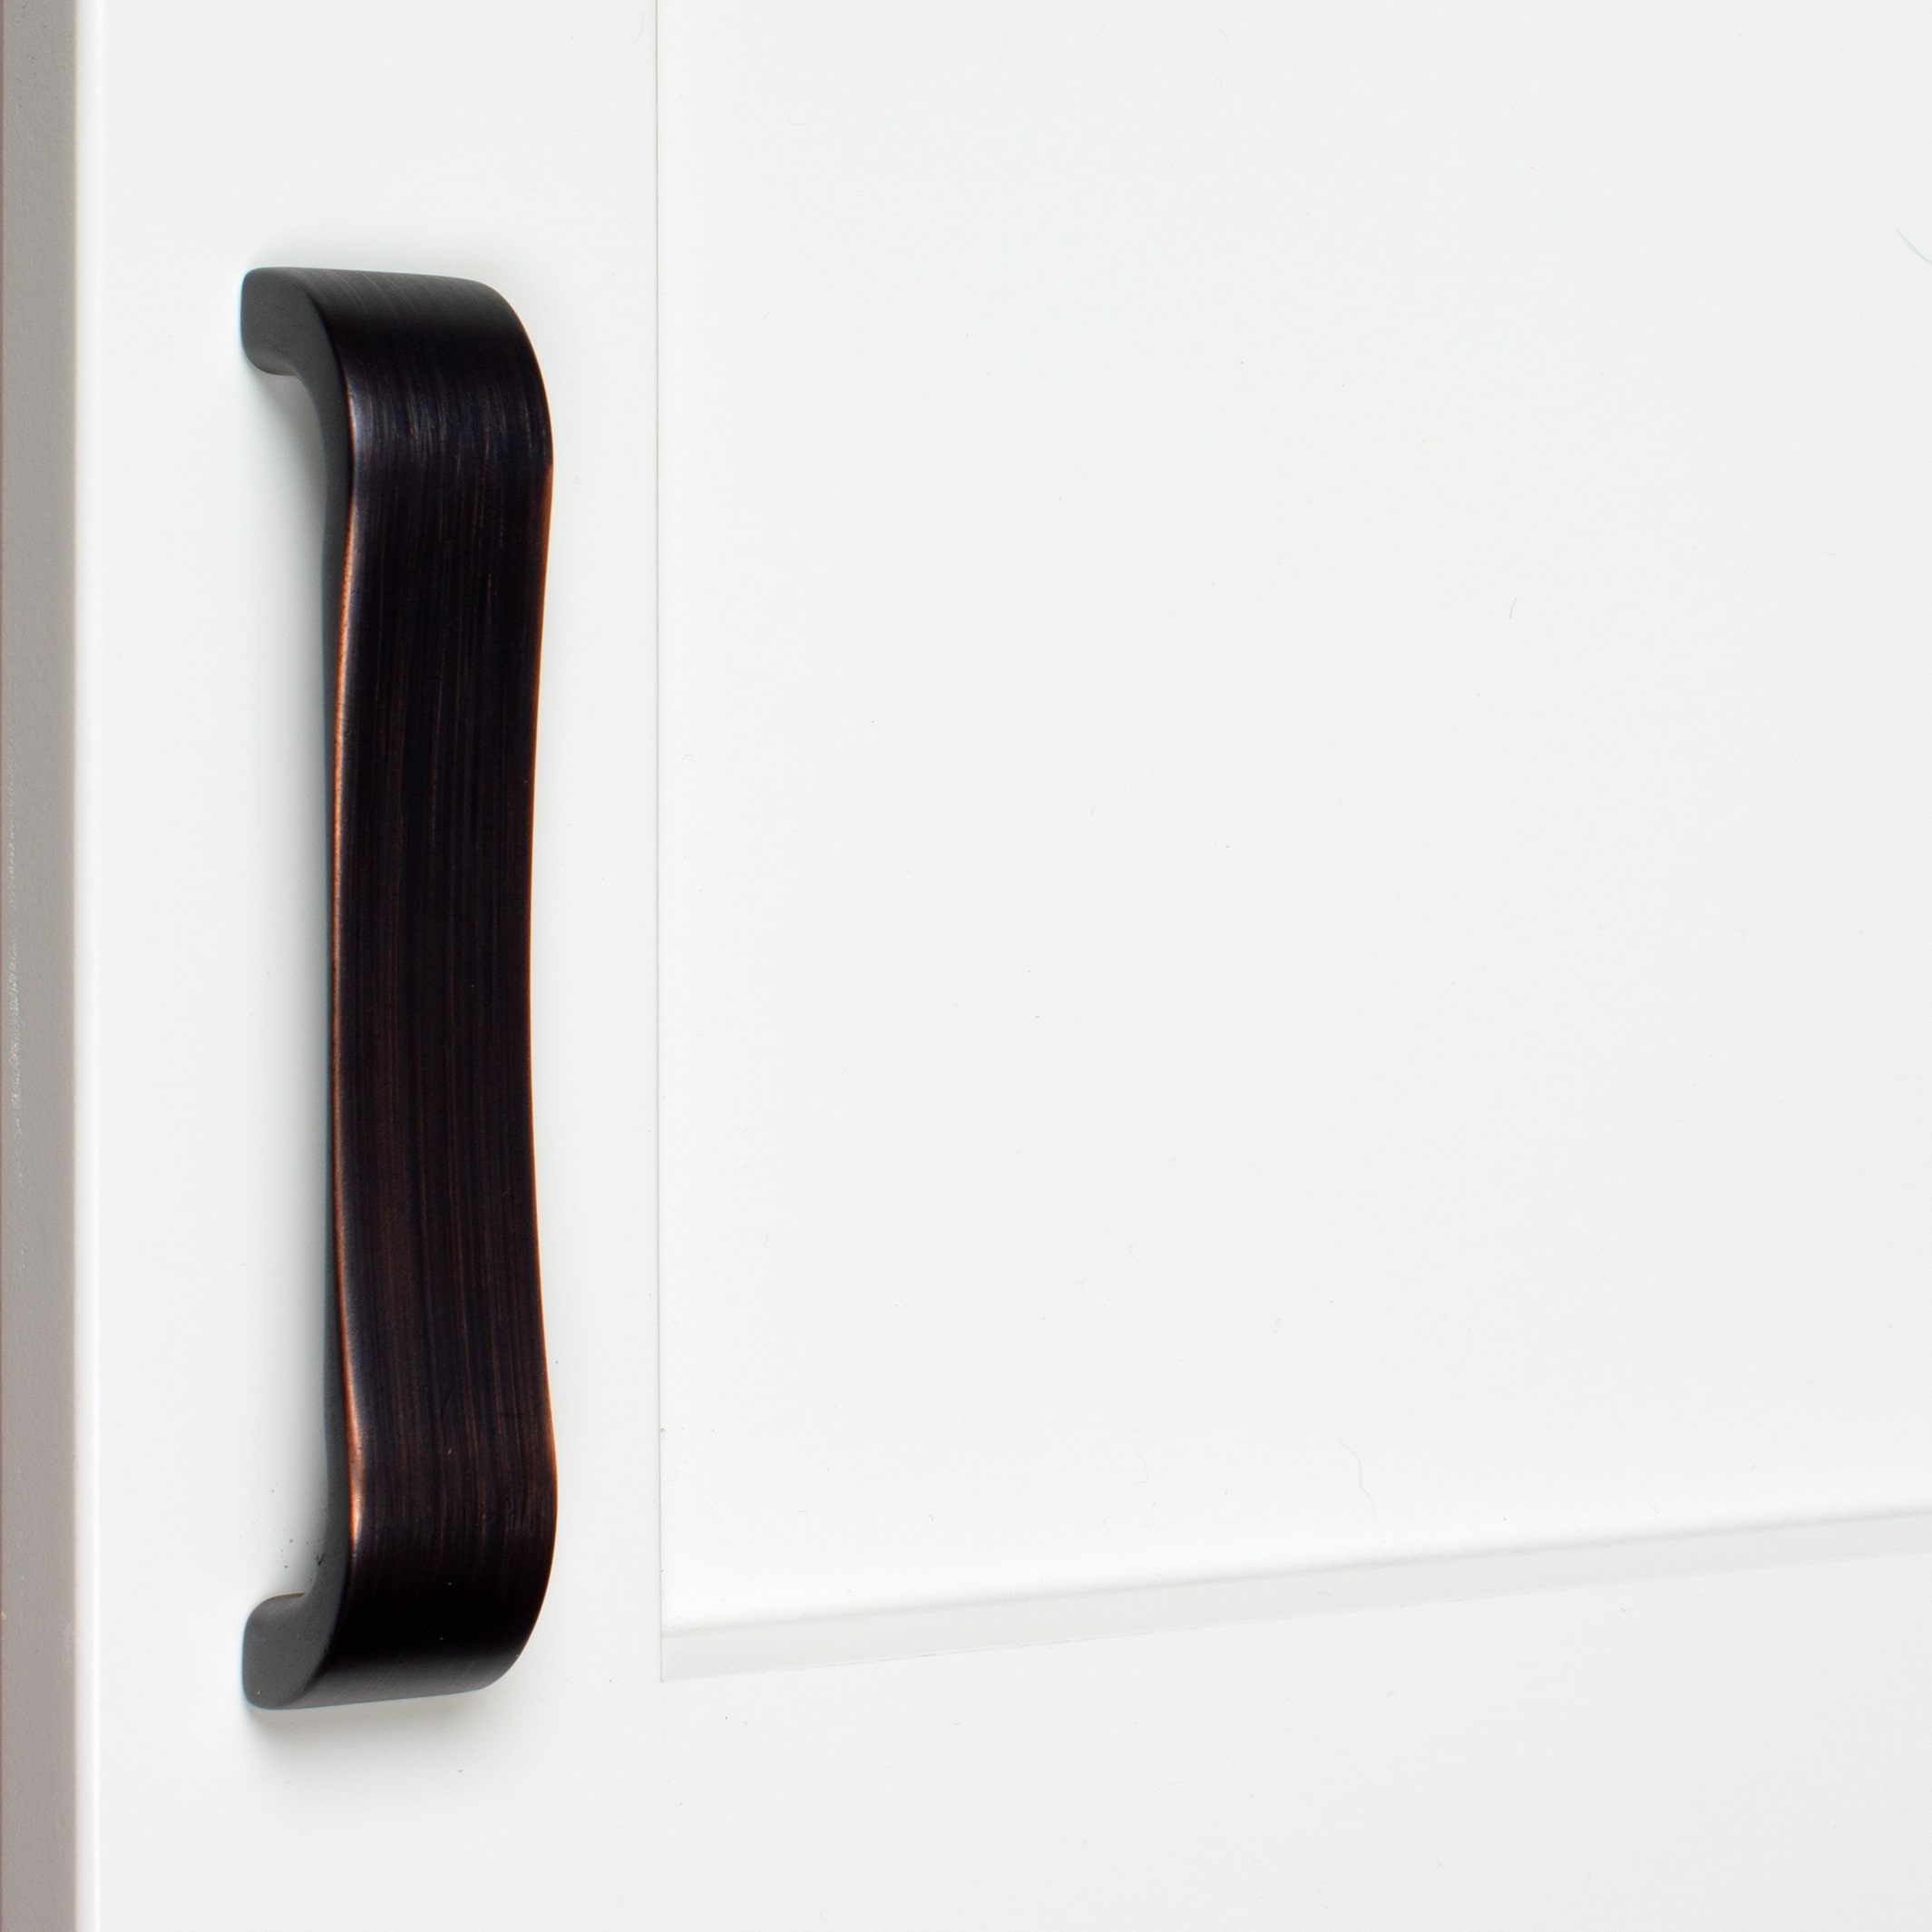 4-1/2 in. Center Smooth Curved Flat Cabinet Pull Handles, Oil Rubbed Bronze, Pack of 10 - image 3 of 3